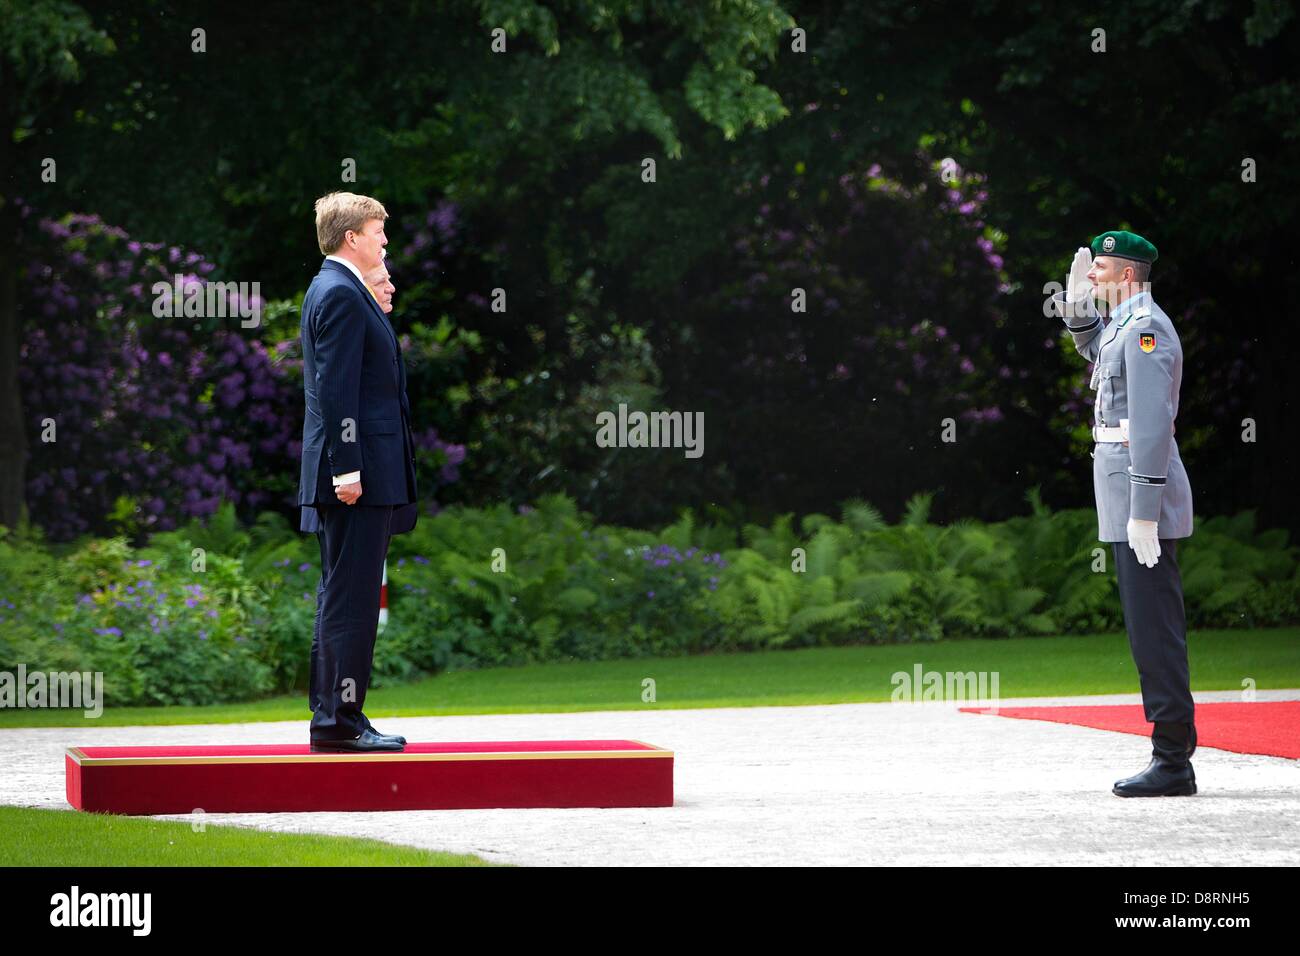 Berlin, Germany. 3rd June 2013. Dutch King Willem-Alexander visits President Gauck of Germany at Schloss Bellevue in Berlin, Germany, 3 June 2013. The King and Queen are in Germany for a two day official visit. Photo: Patrick van Katwijk/dpa/Alamy Live News Stock Photo